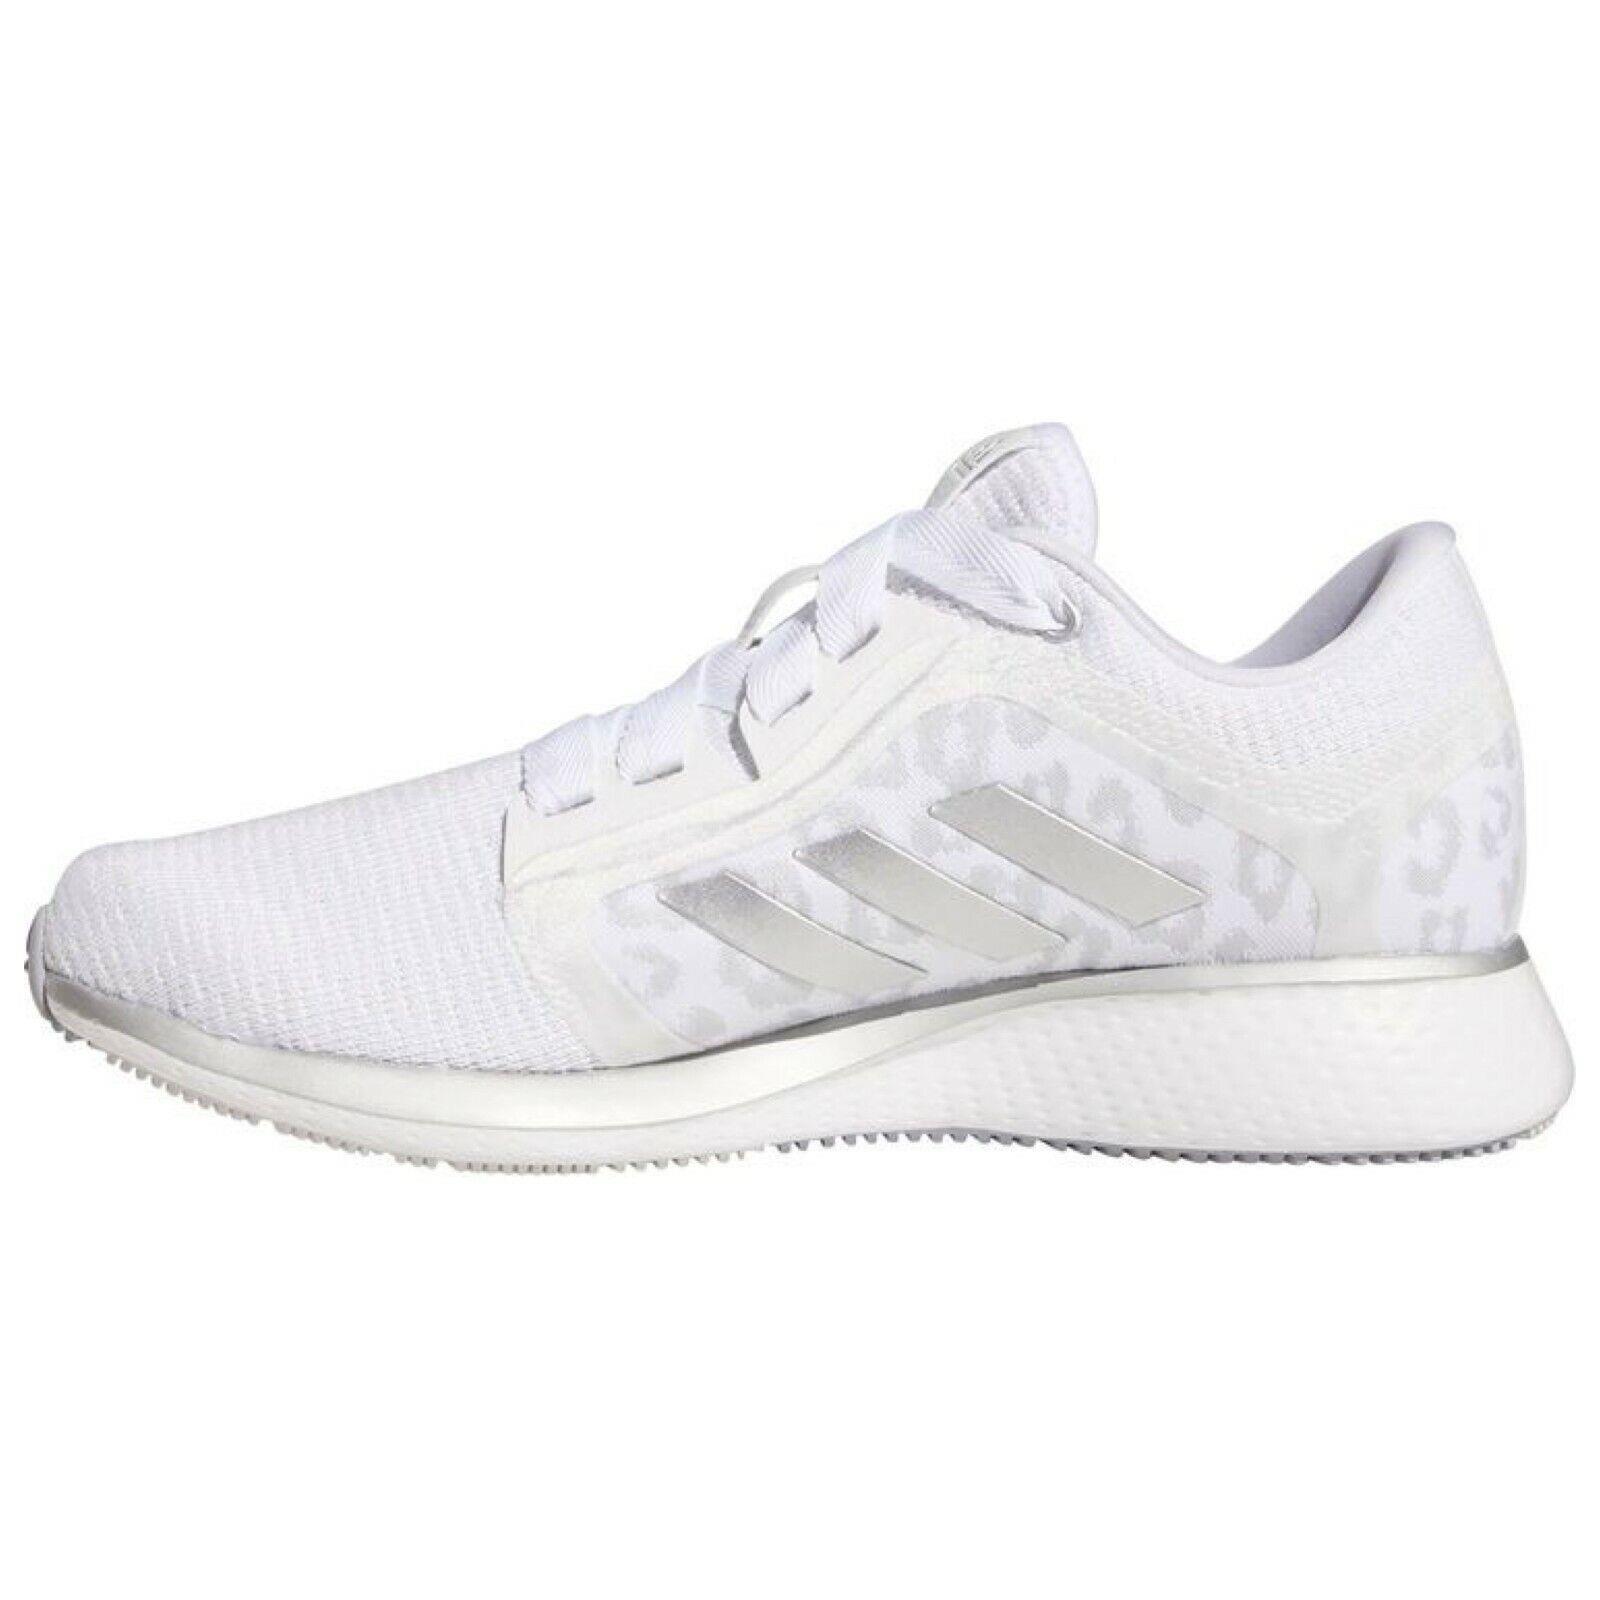 Adidas shoes Edge Lux - White , GREY/WHITE/LEOPARD Manufacturer 4